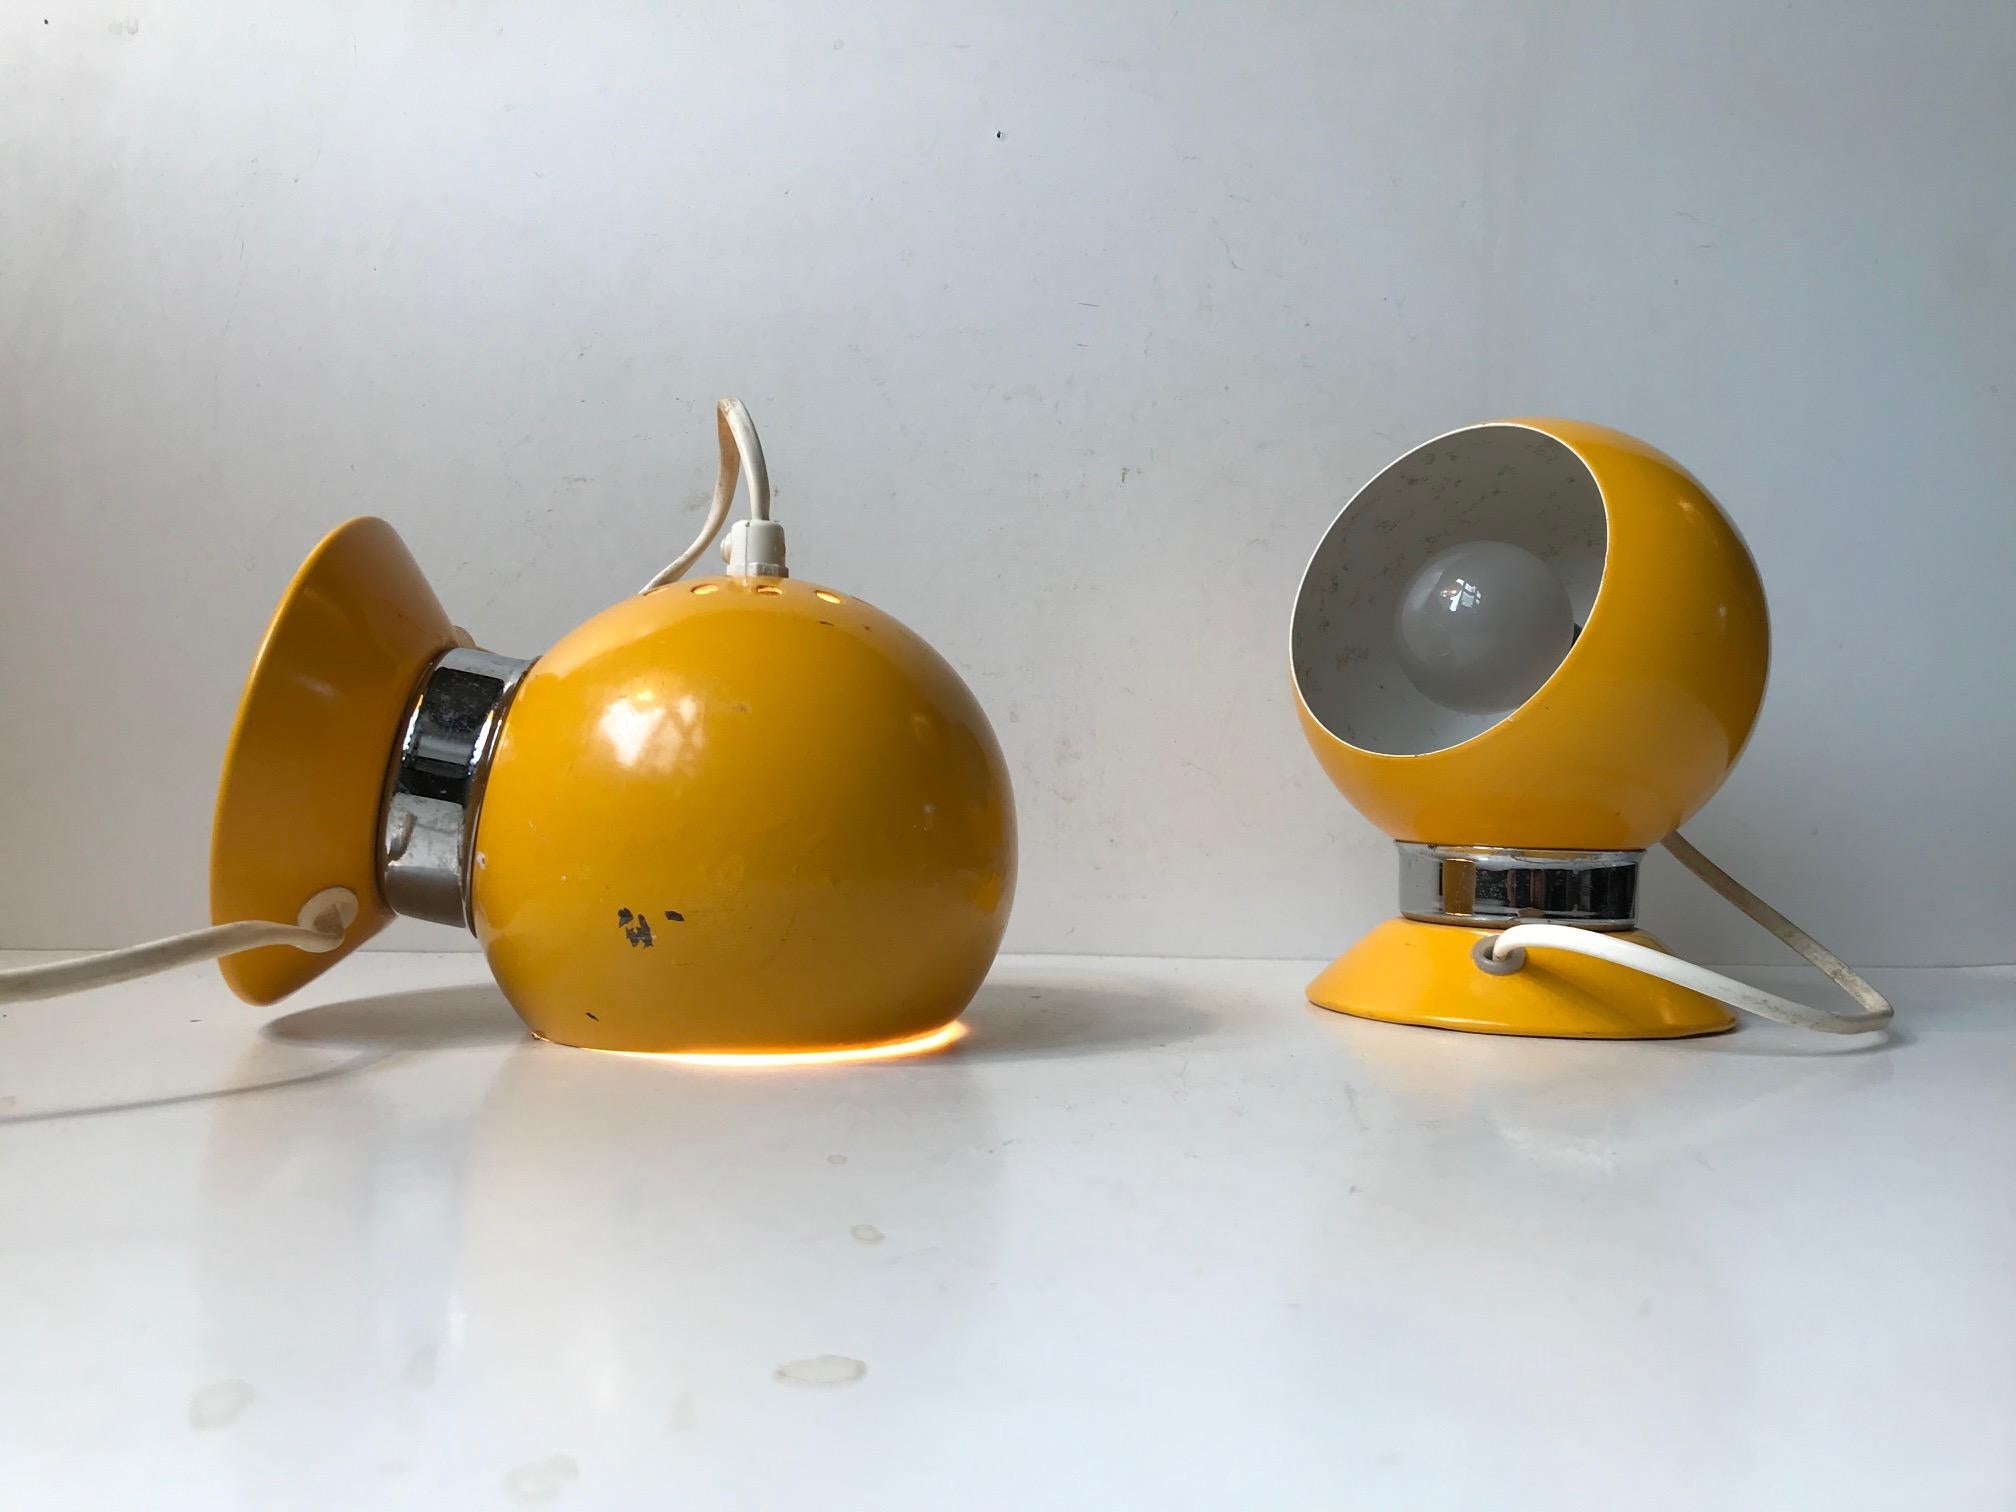 Vintage wall or bedside globe shaped lights manufactured by ABO in Denmark during the early 1970s. These ball lamps with magnetic bases are easily adjustable and removable.